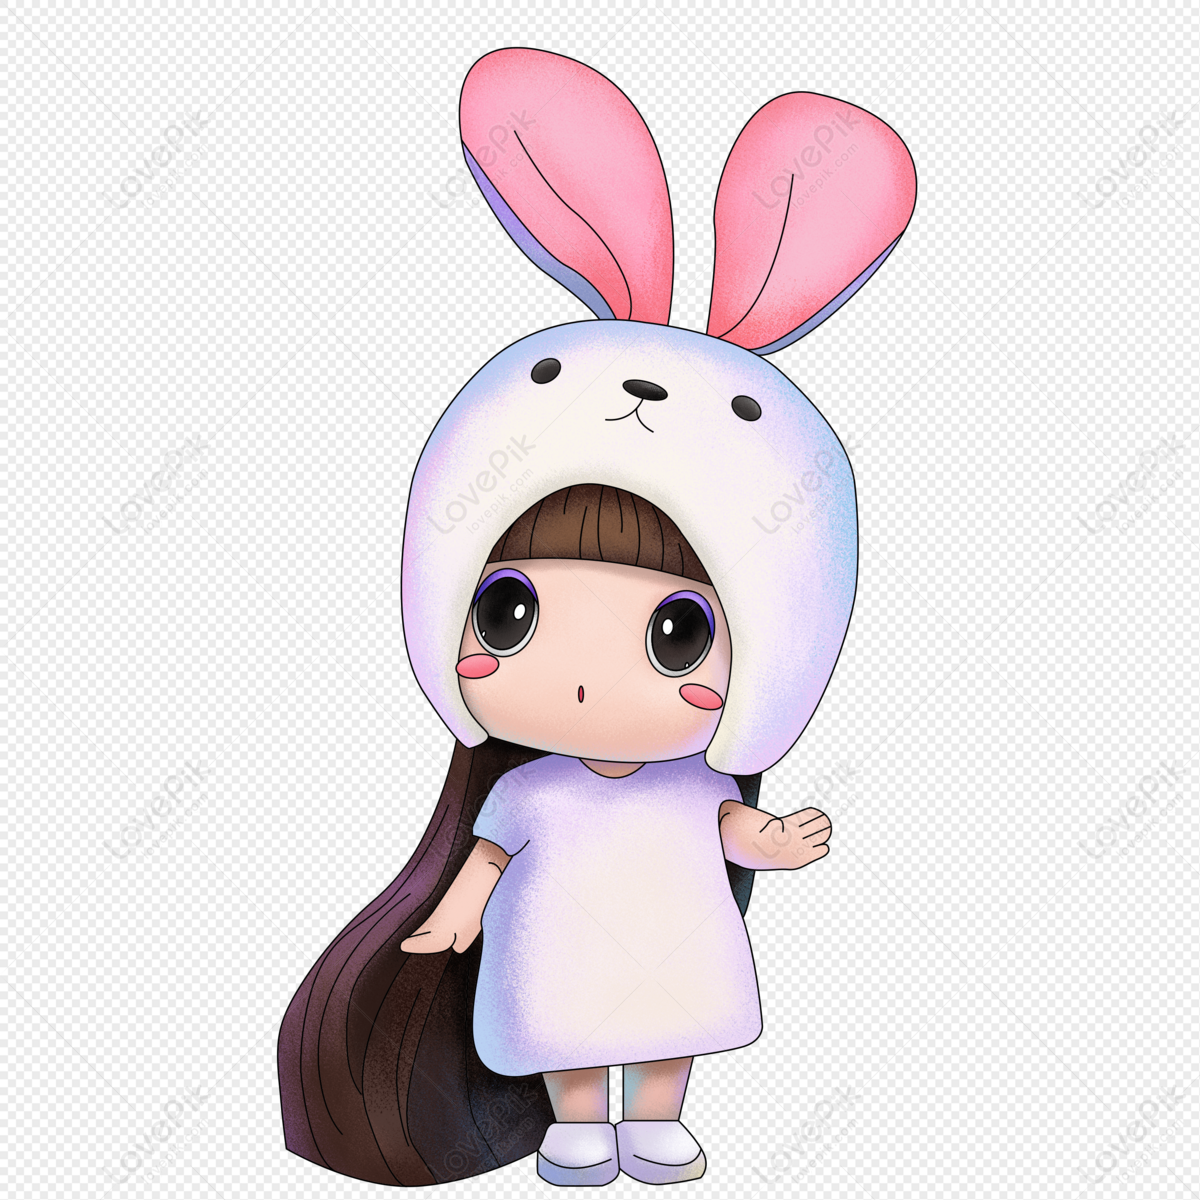 Doll PNG Image Free Download And Clipart Image For Free Download - Lovepik  | 401734051